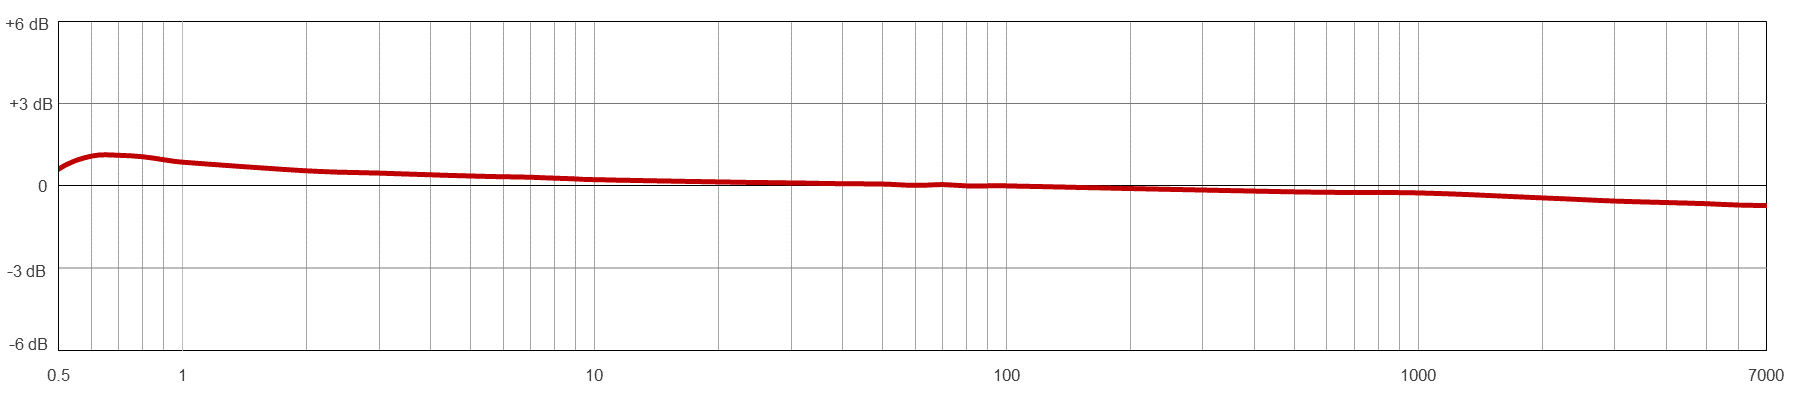 AC154TYPICAL FREQUENCY RESPONSE